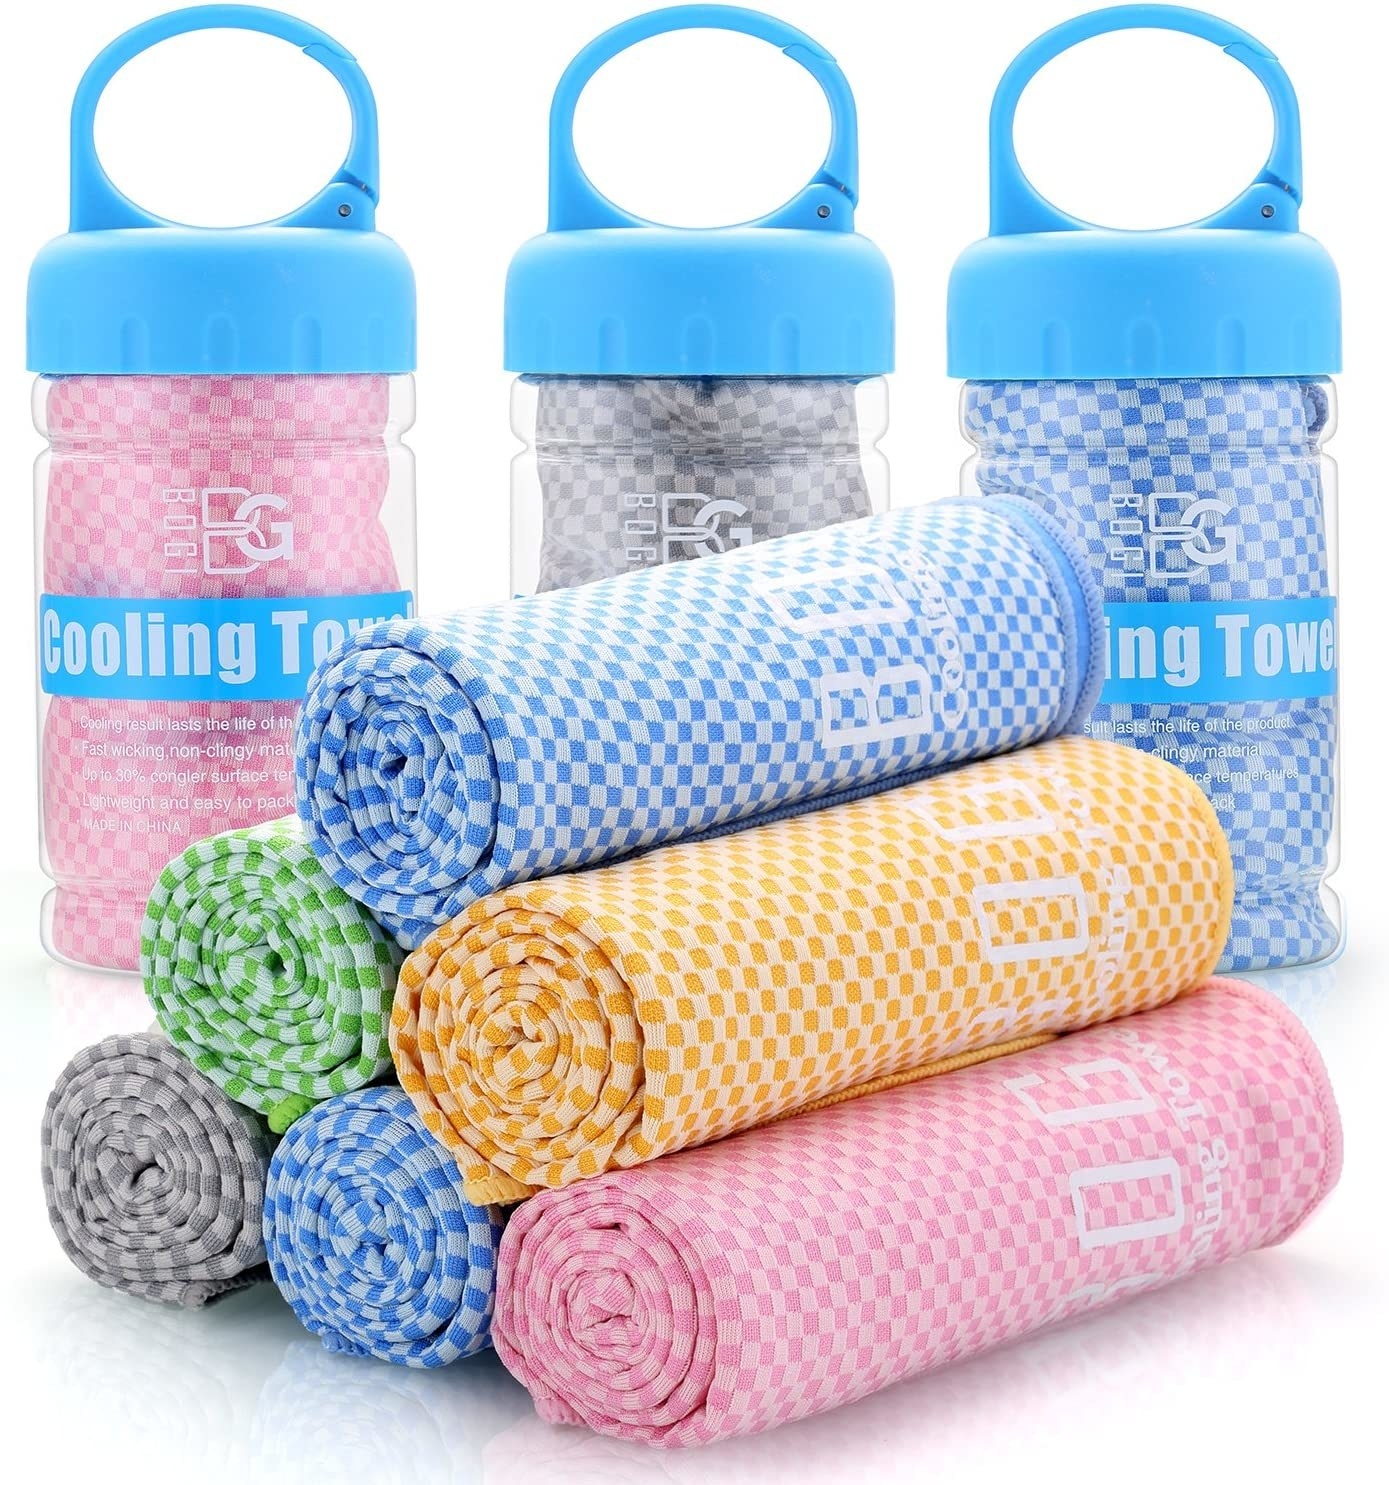 A stack of the cooling towels in front of a plain background